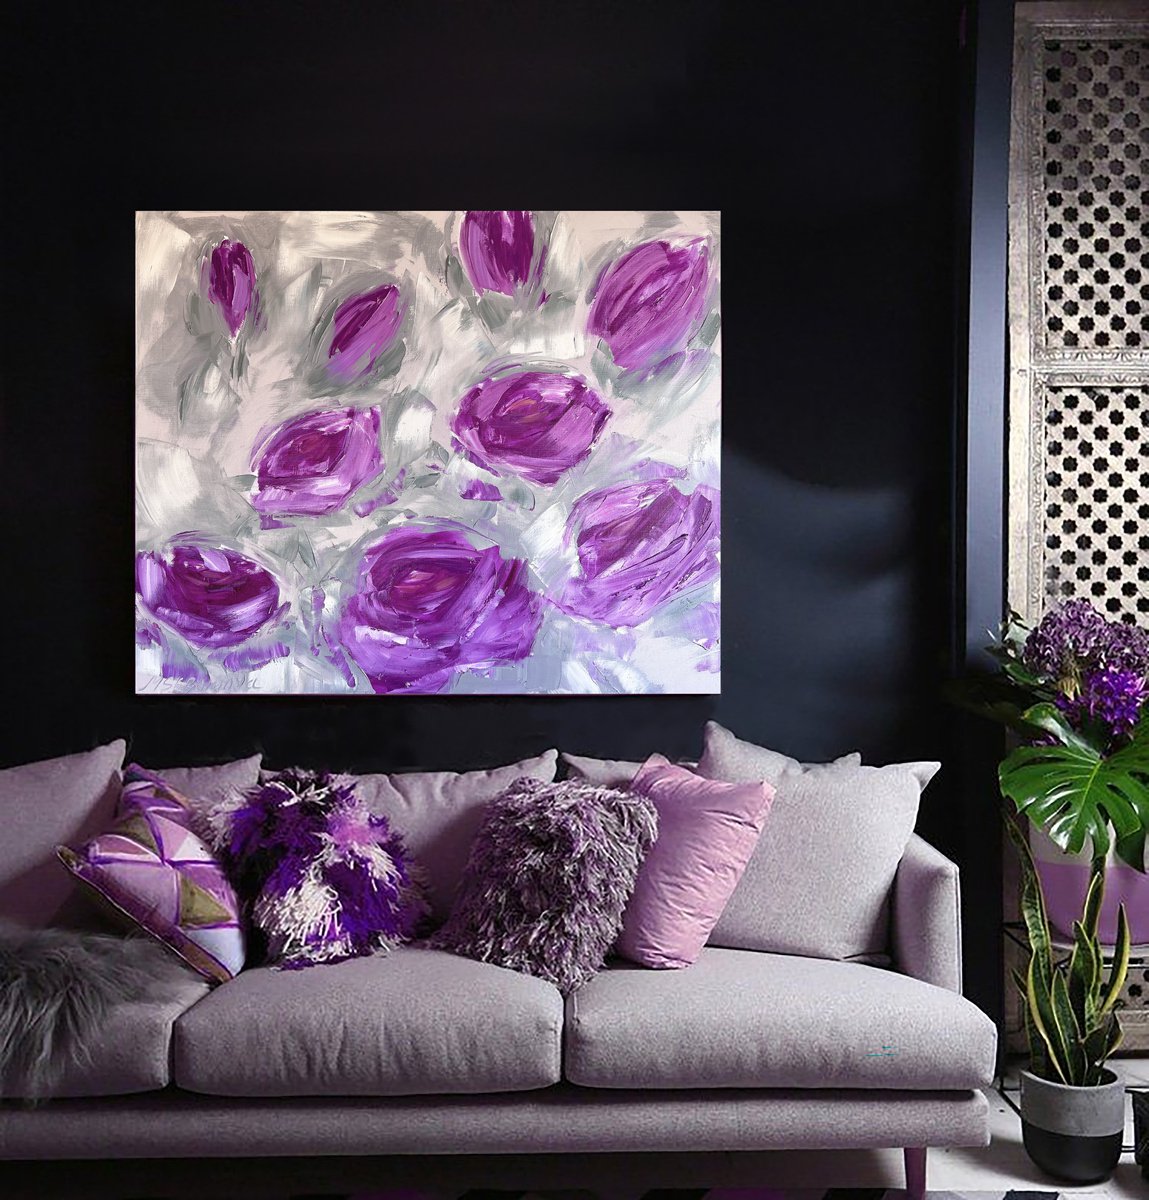 Violet mix - large roses, rough, abstract flowers ?L. by Marina Skromova